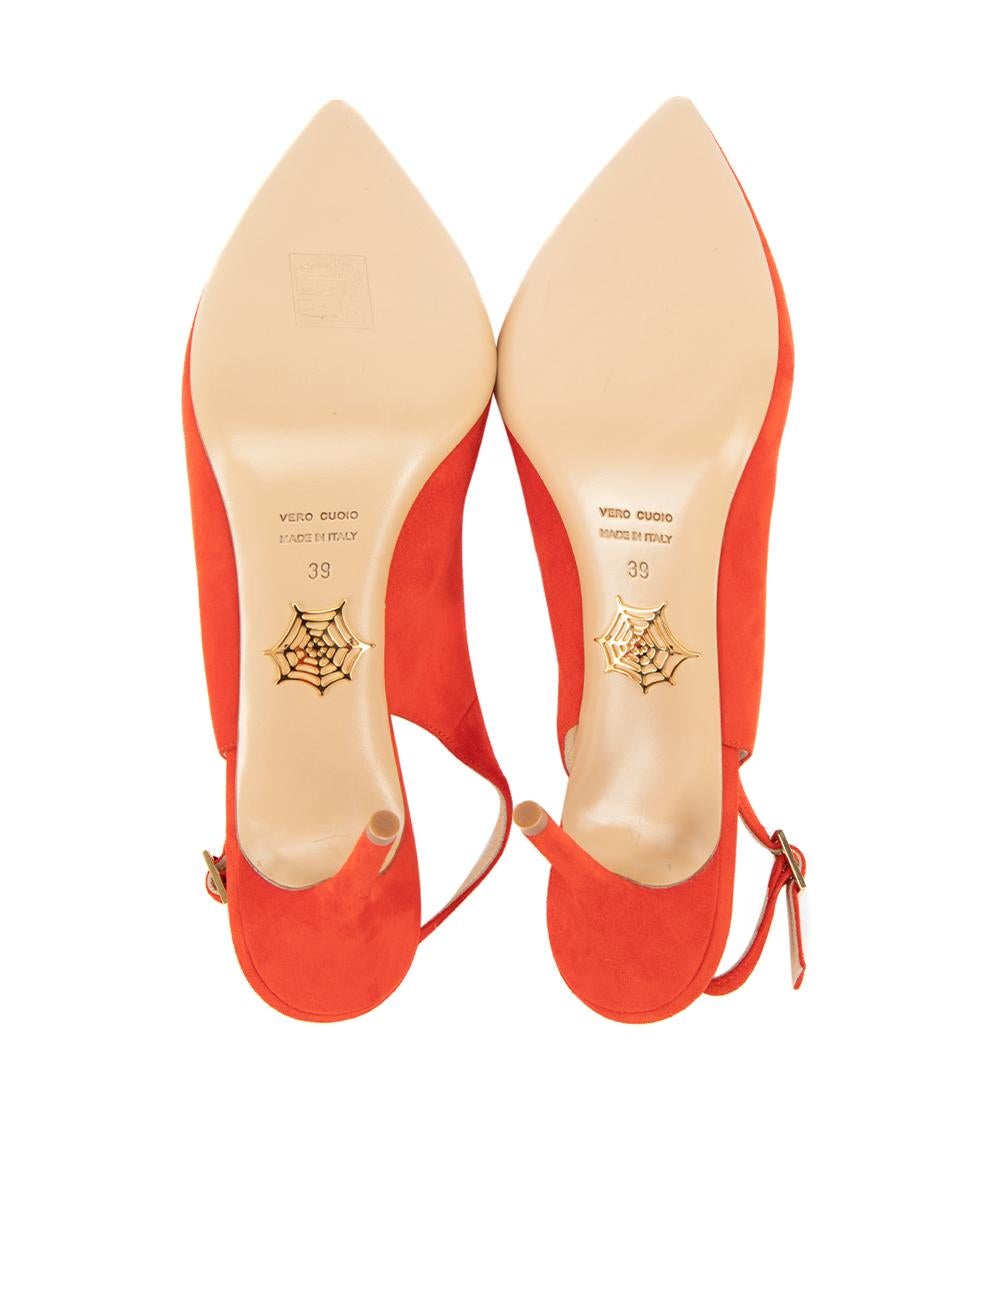 Pre-Loved Charlotte Olympia Women's Red Suede Slingback Heels with Coral Detail 1